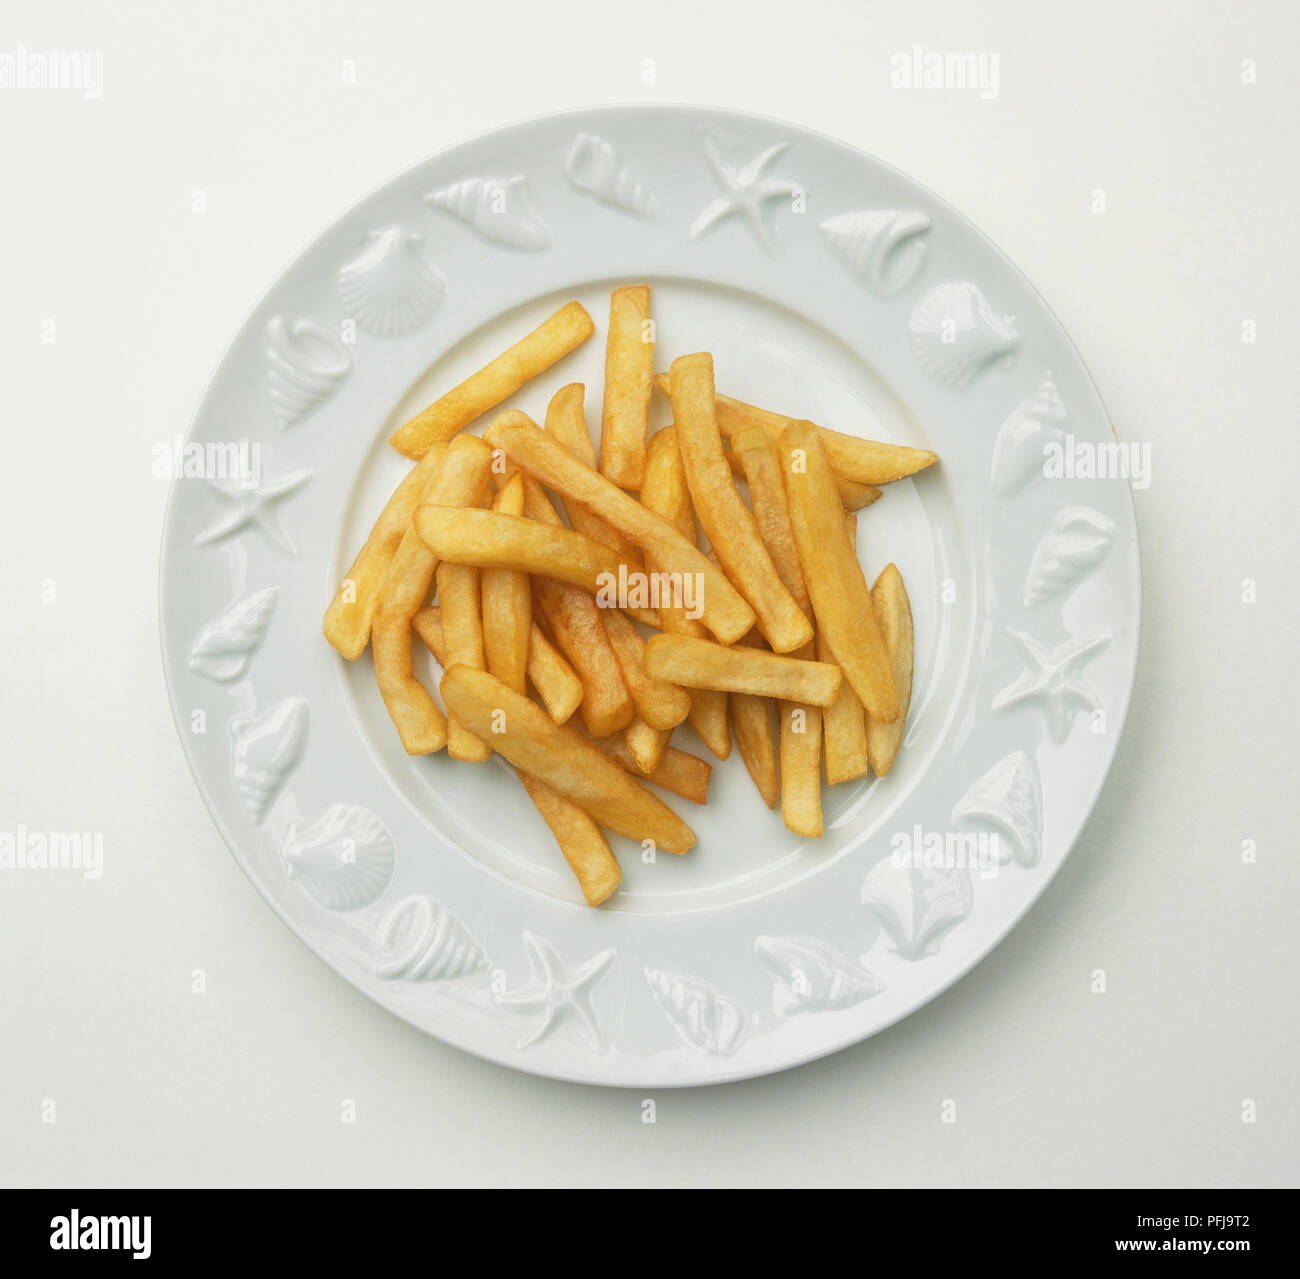 Chips on a white plate, rim showing sea life design, view from above Stock Photo